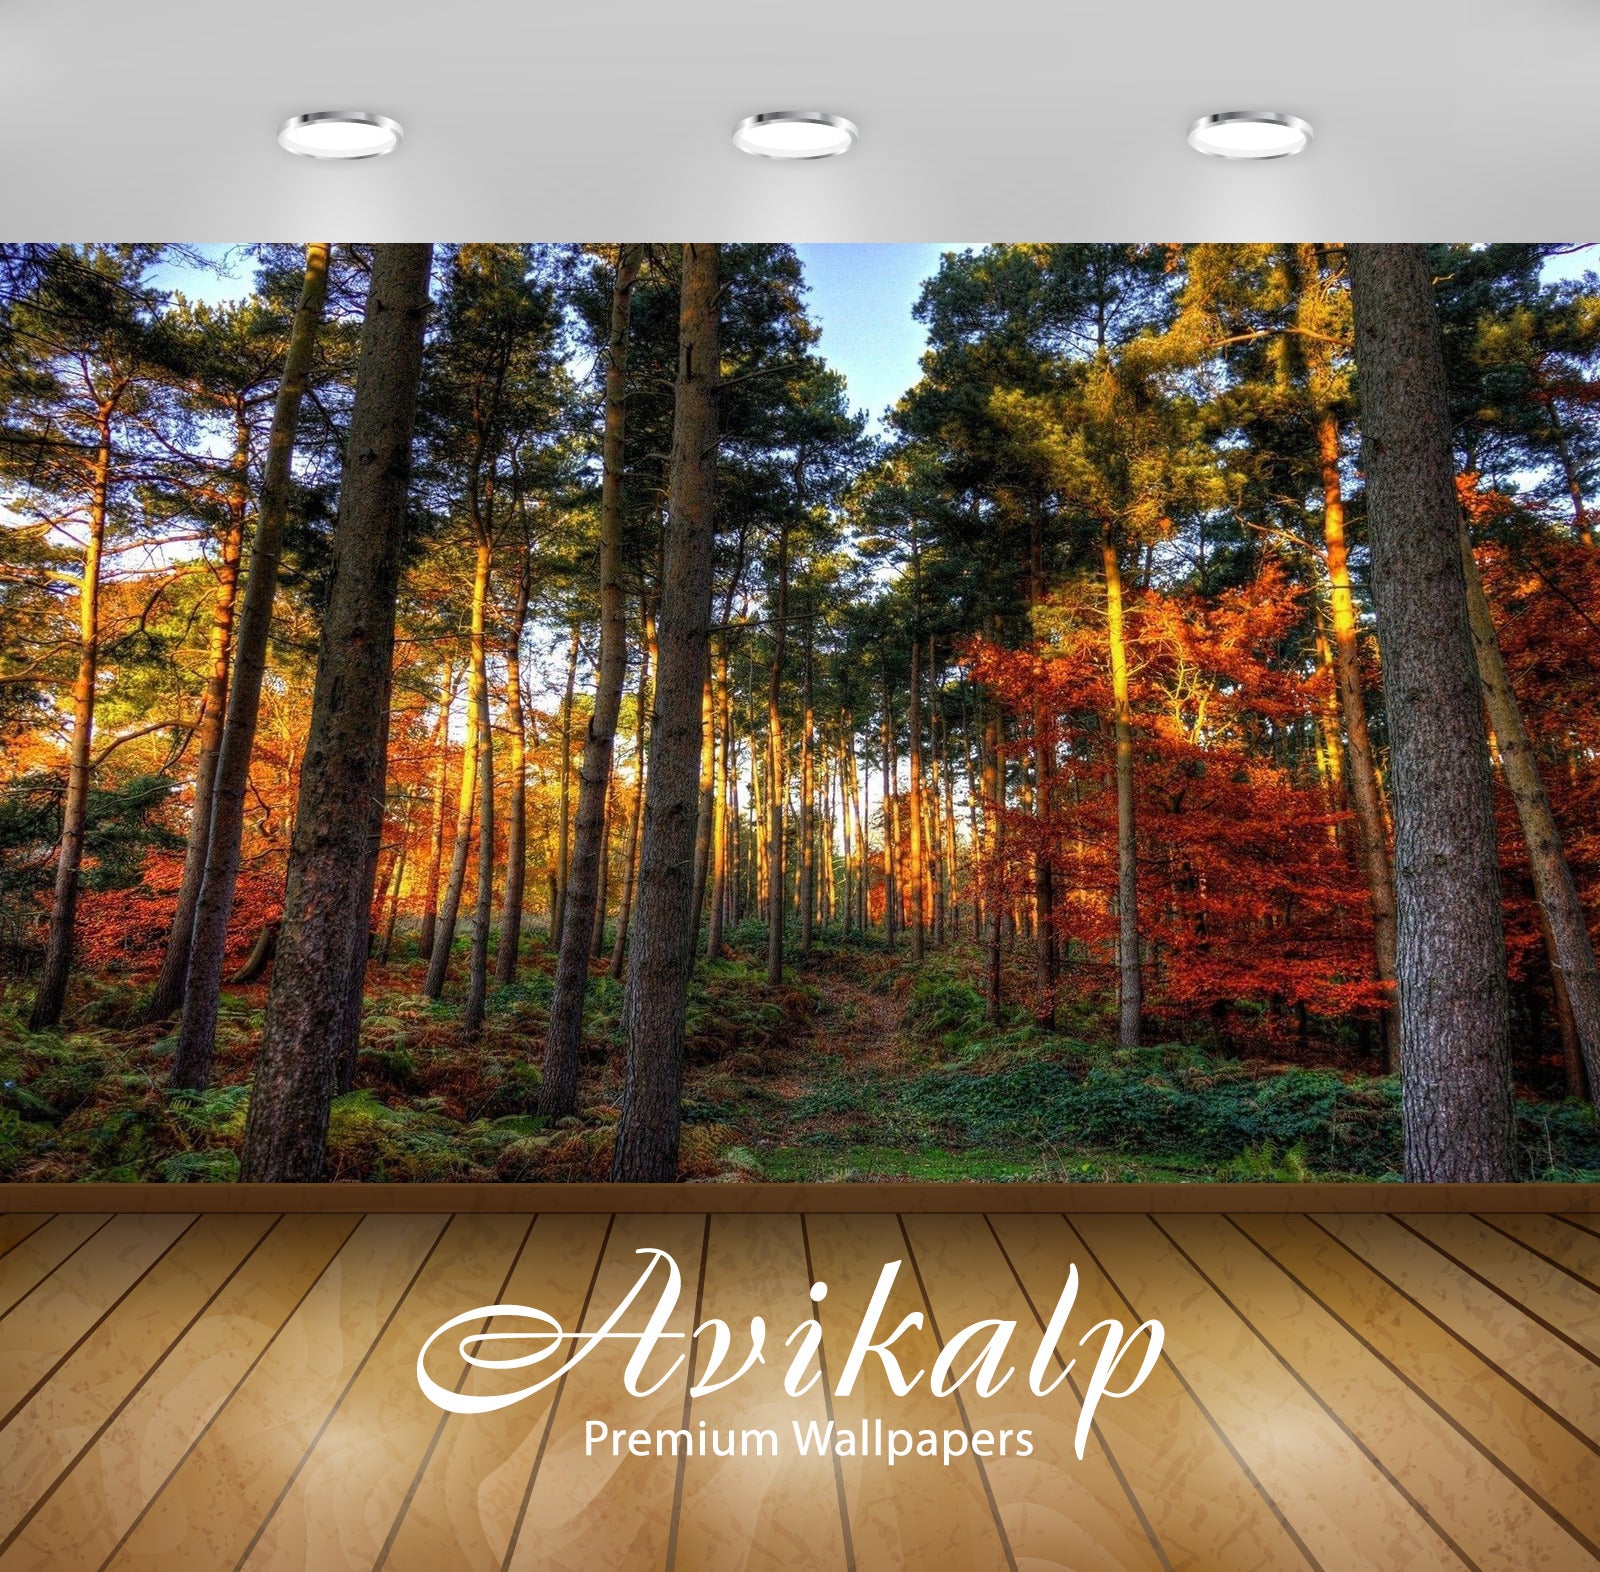 Avikalp Exclusive Awi6170 Shades Of Autumn In The Forest Nature Full HD Wallpapers for Living room,